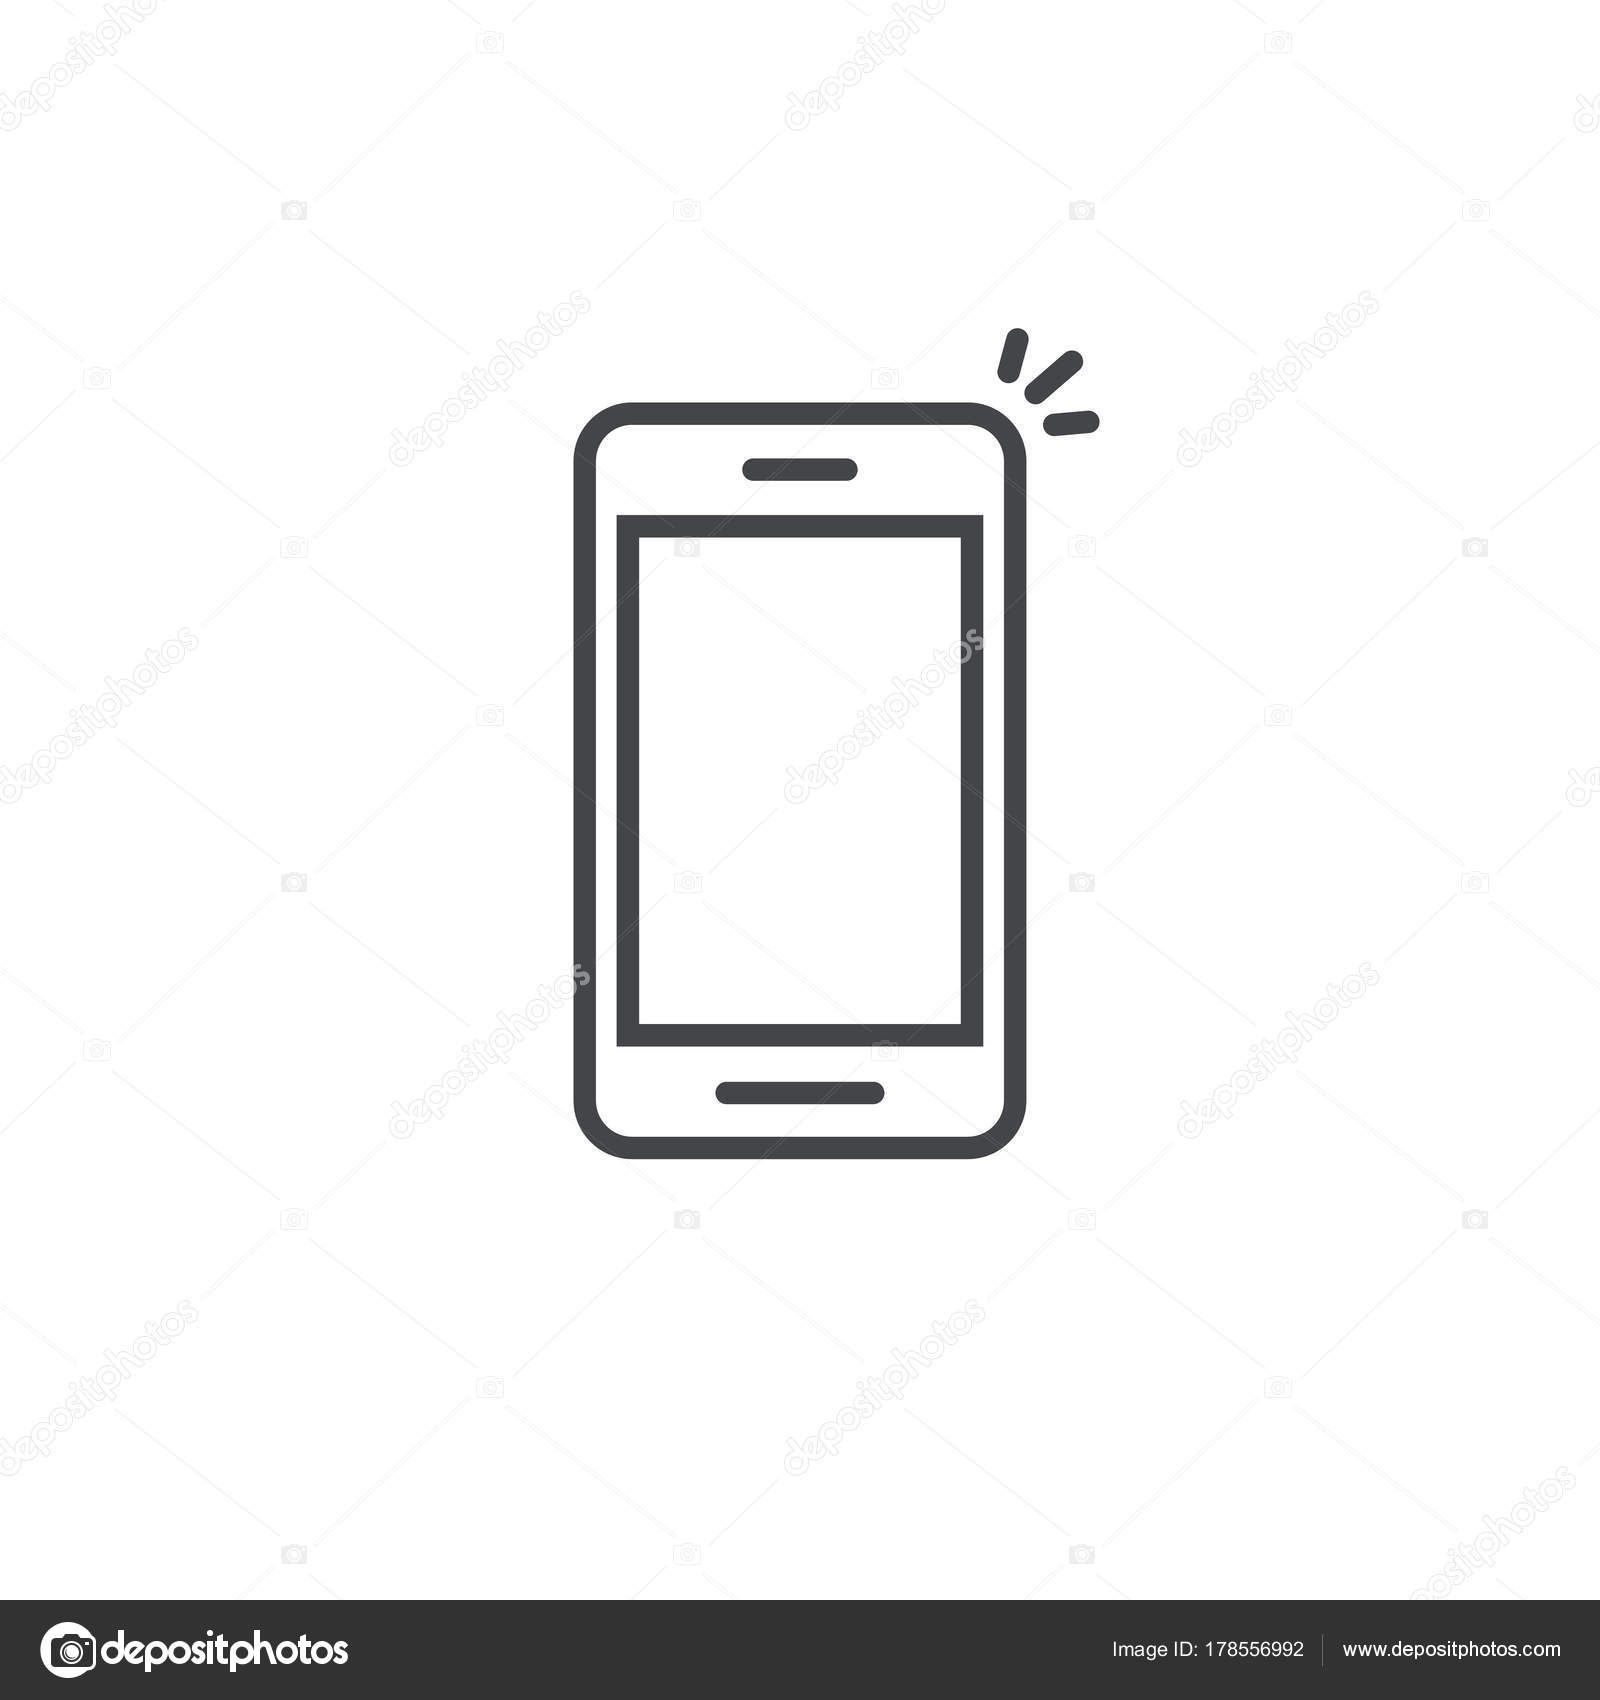 Mobile phone in hand icon. Vector illustration | Stock Vector 